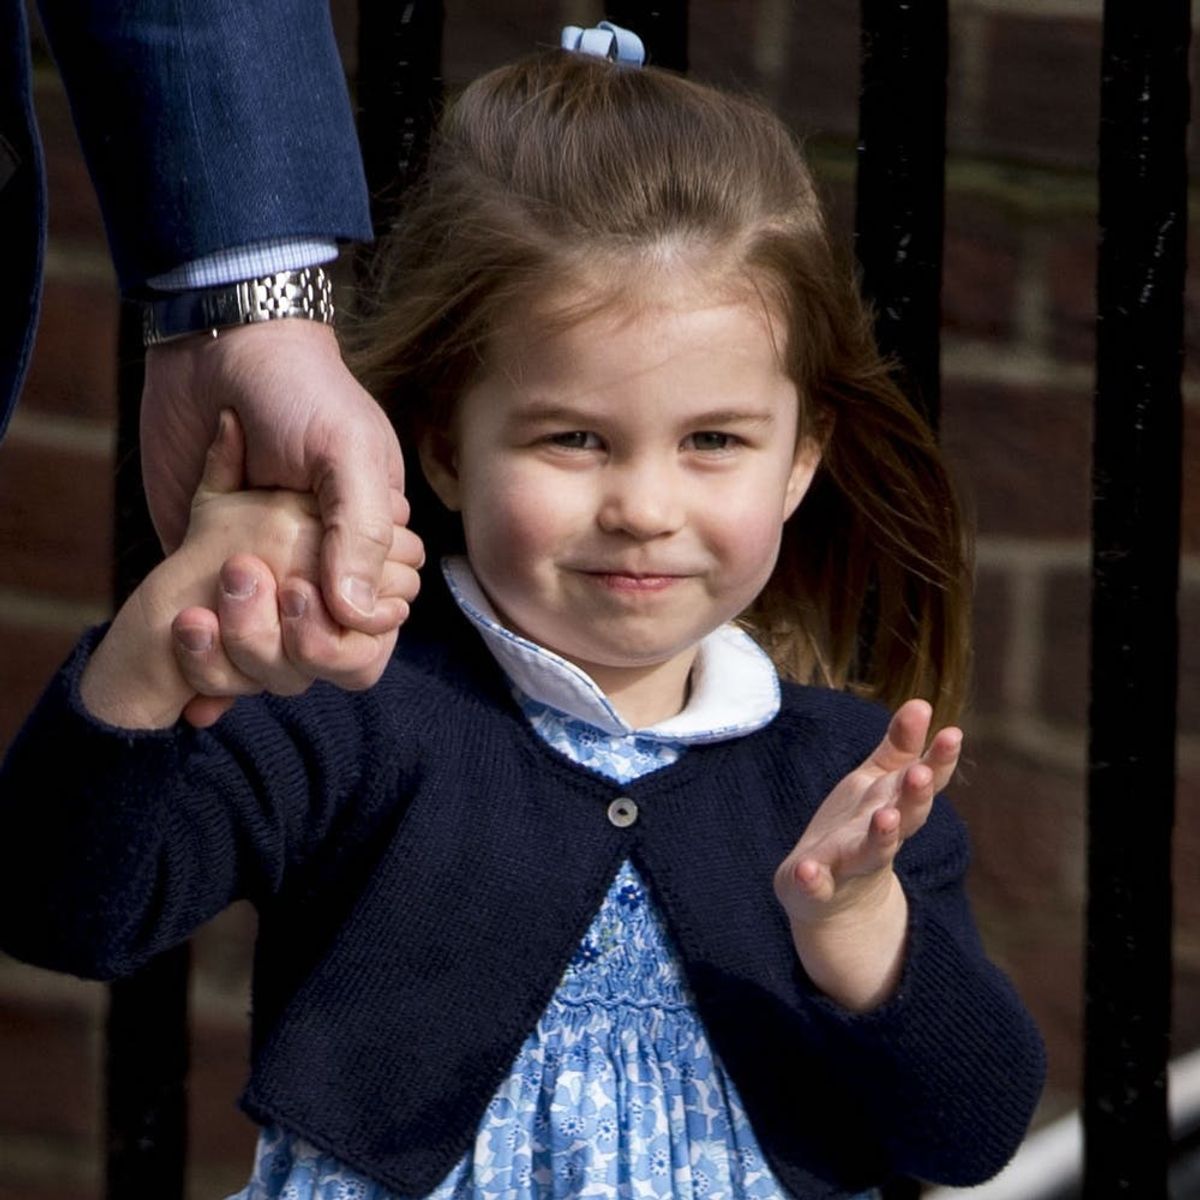 Here’s Why the Birth of Royal Baby #3 Is Historic for Princess Charlotte